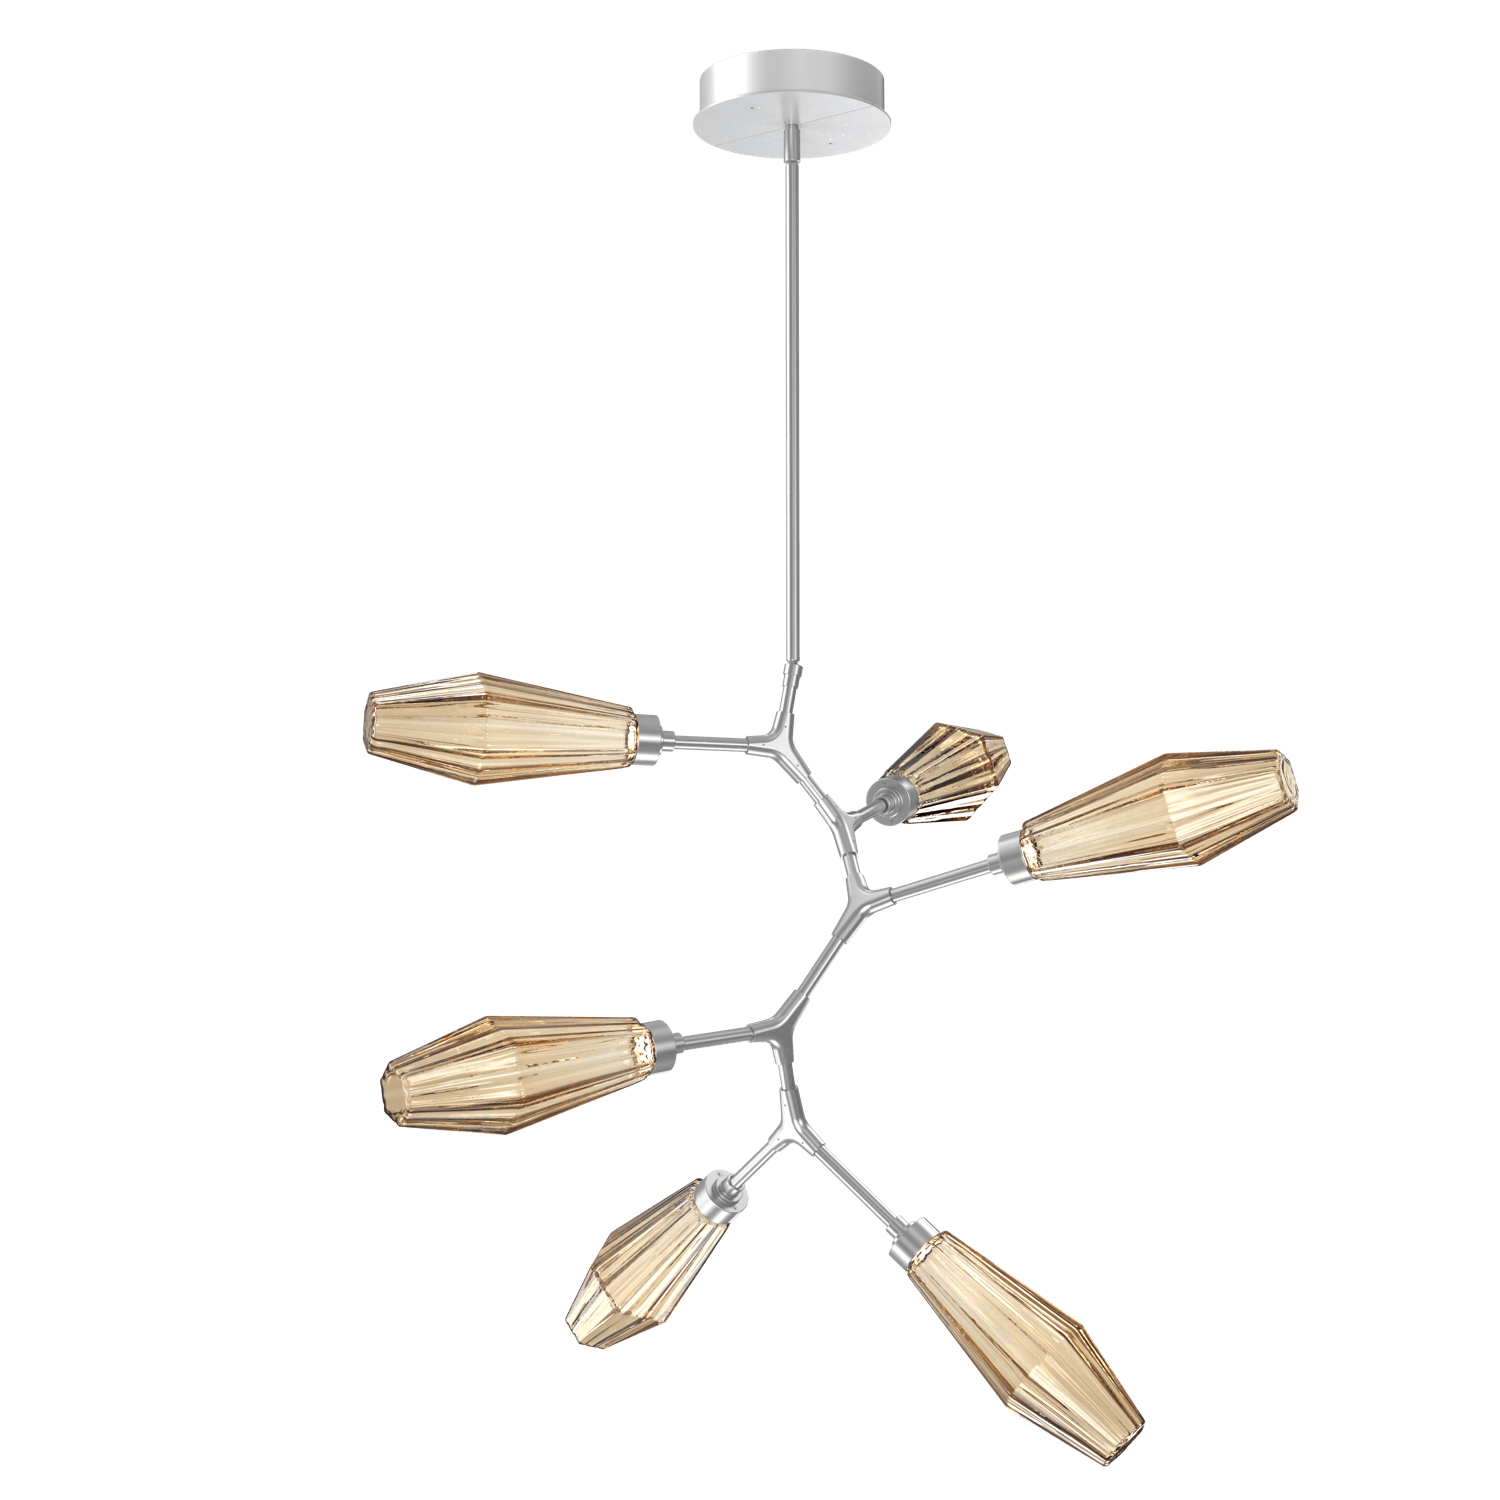 CHB0049-VA-CS-RB-Hammerton-Studio-Aalto-6-light-modern-vine-chandelier-with-classic-silver-finish-and-optic-ribbed-bronze-glass-shades-and-LED-lamping